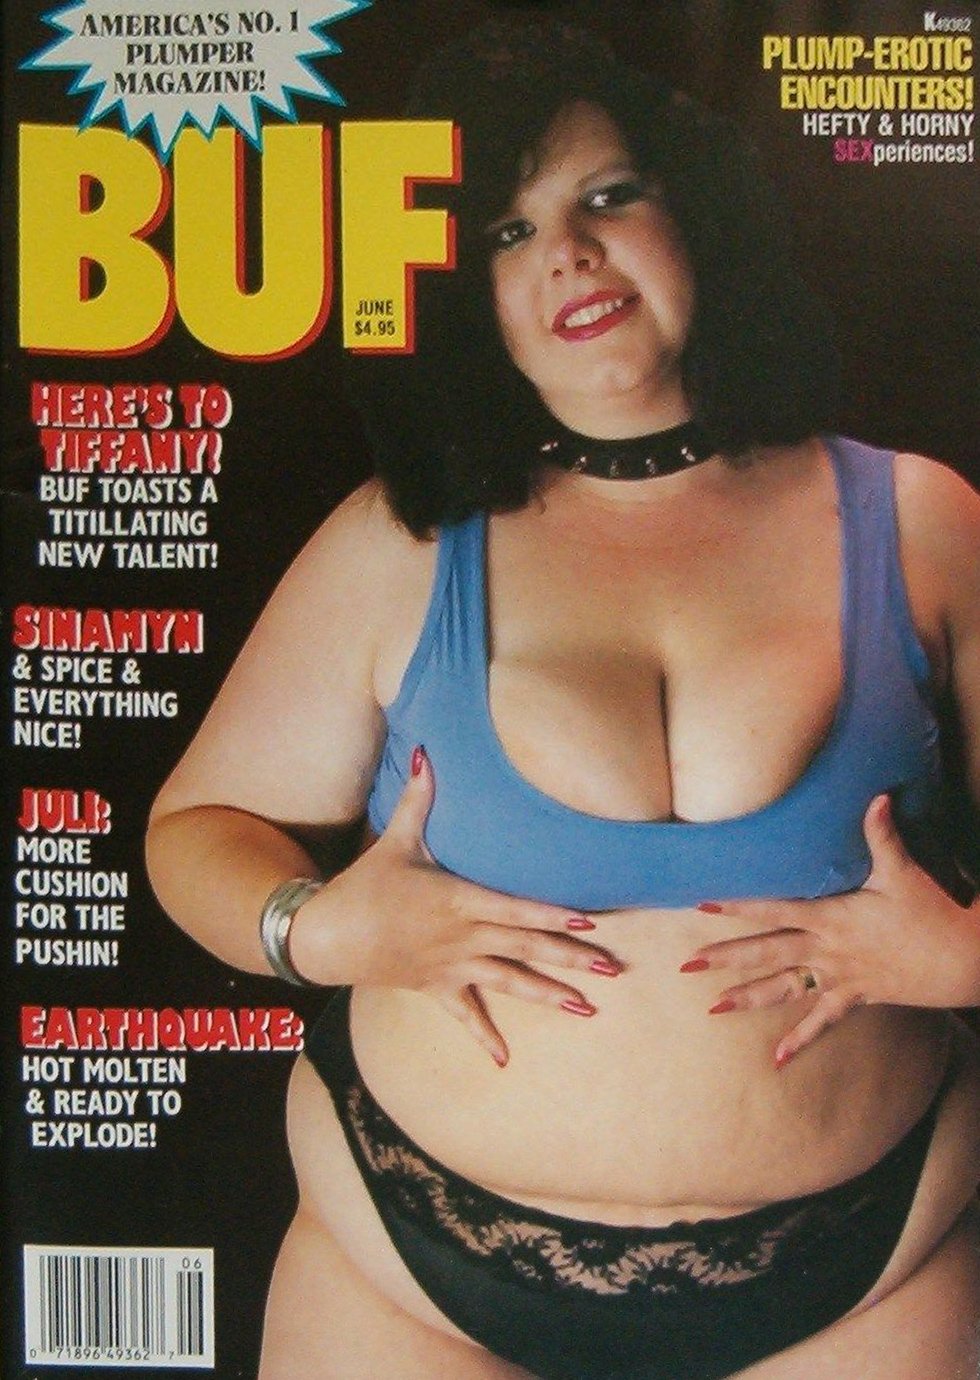 BUF June 1993 magazine back issue BUF (Big Up Front) Swinger magizine back copy BUF June 1993 Adult Magazine Back Issue Specializing in Naked Big Breasted Women, Big Up Front Swingers are Girls with Big Tits. Here's To Tiffany! BUF Toasts a Titillating New Talent!.